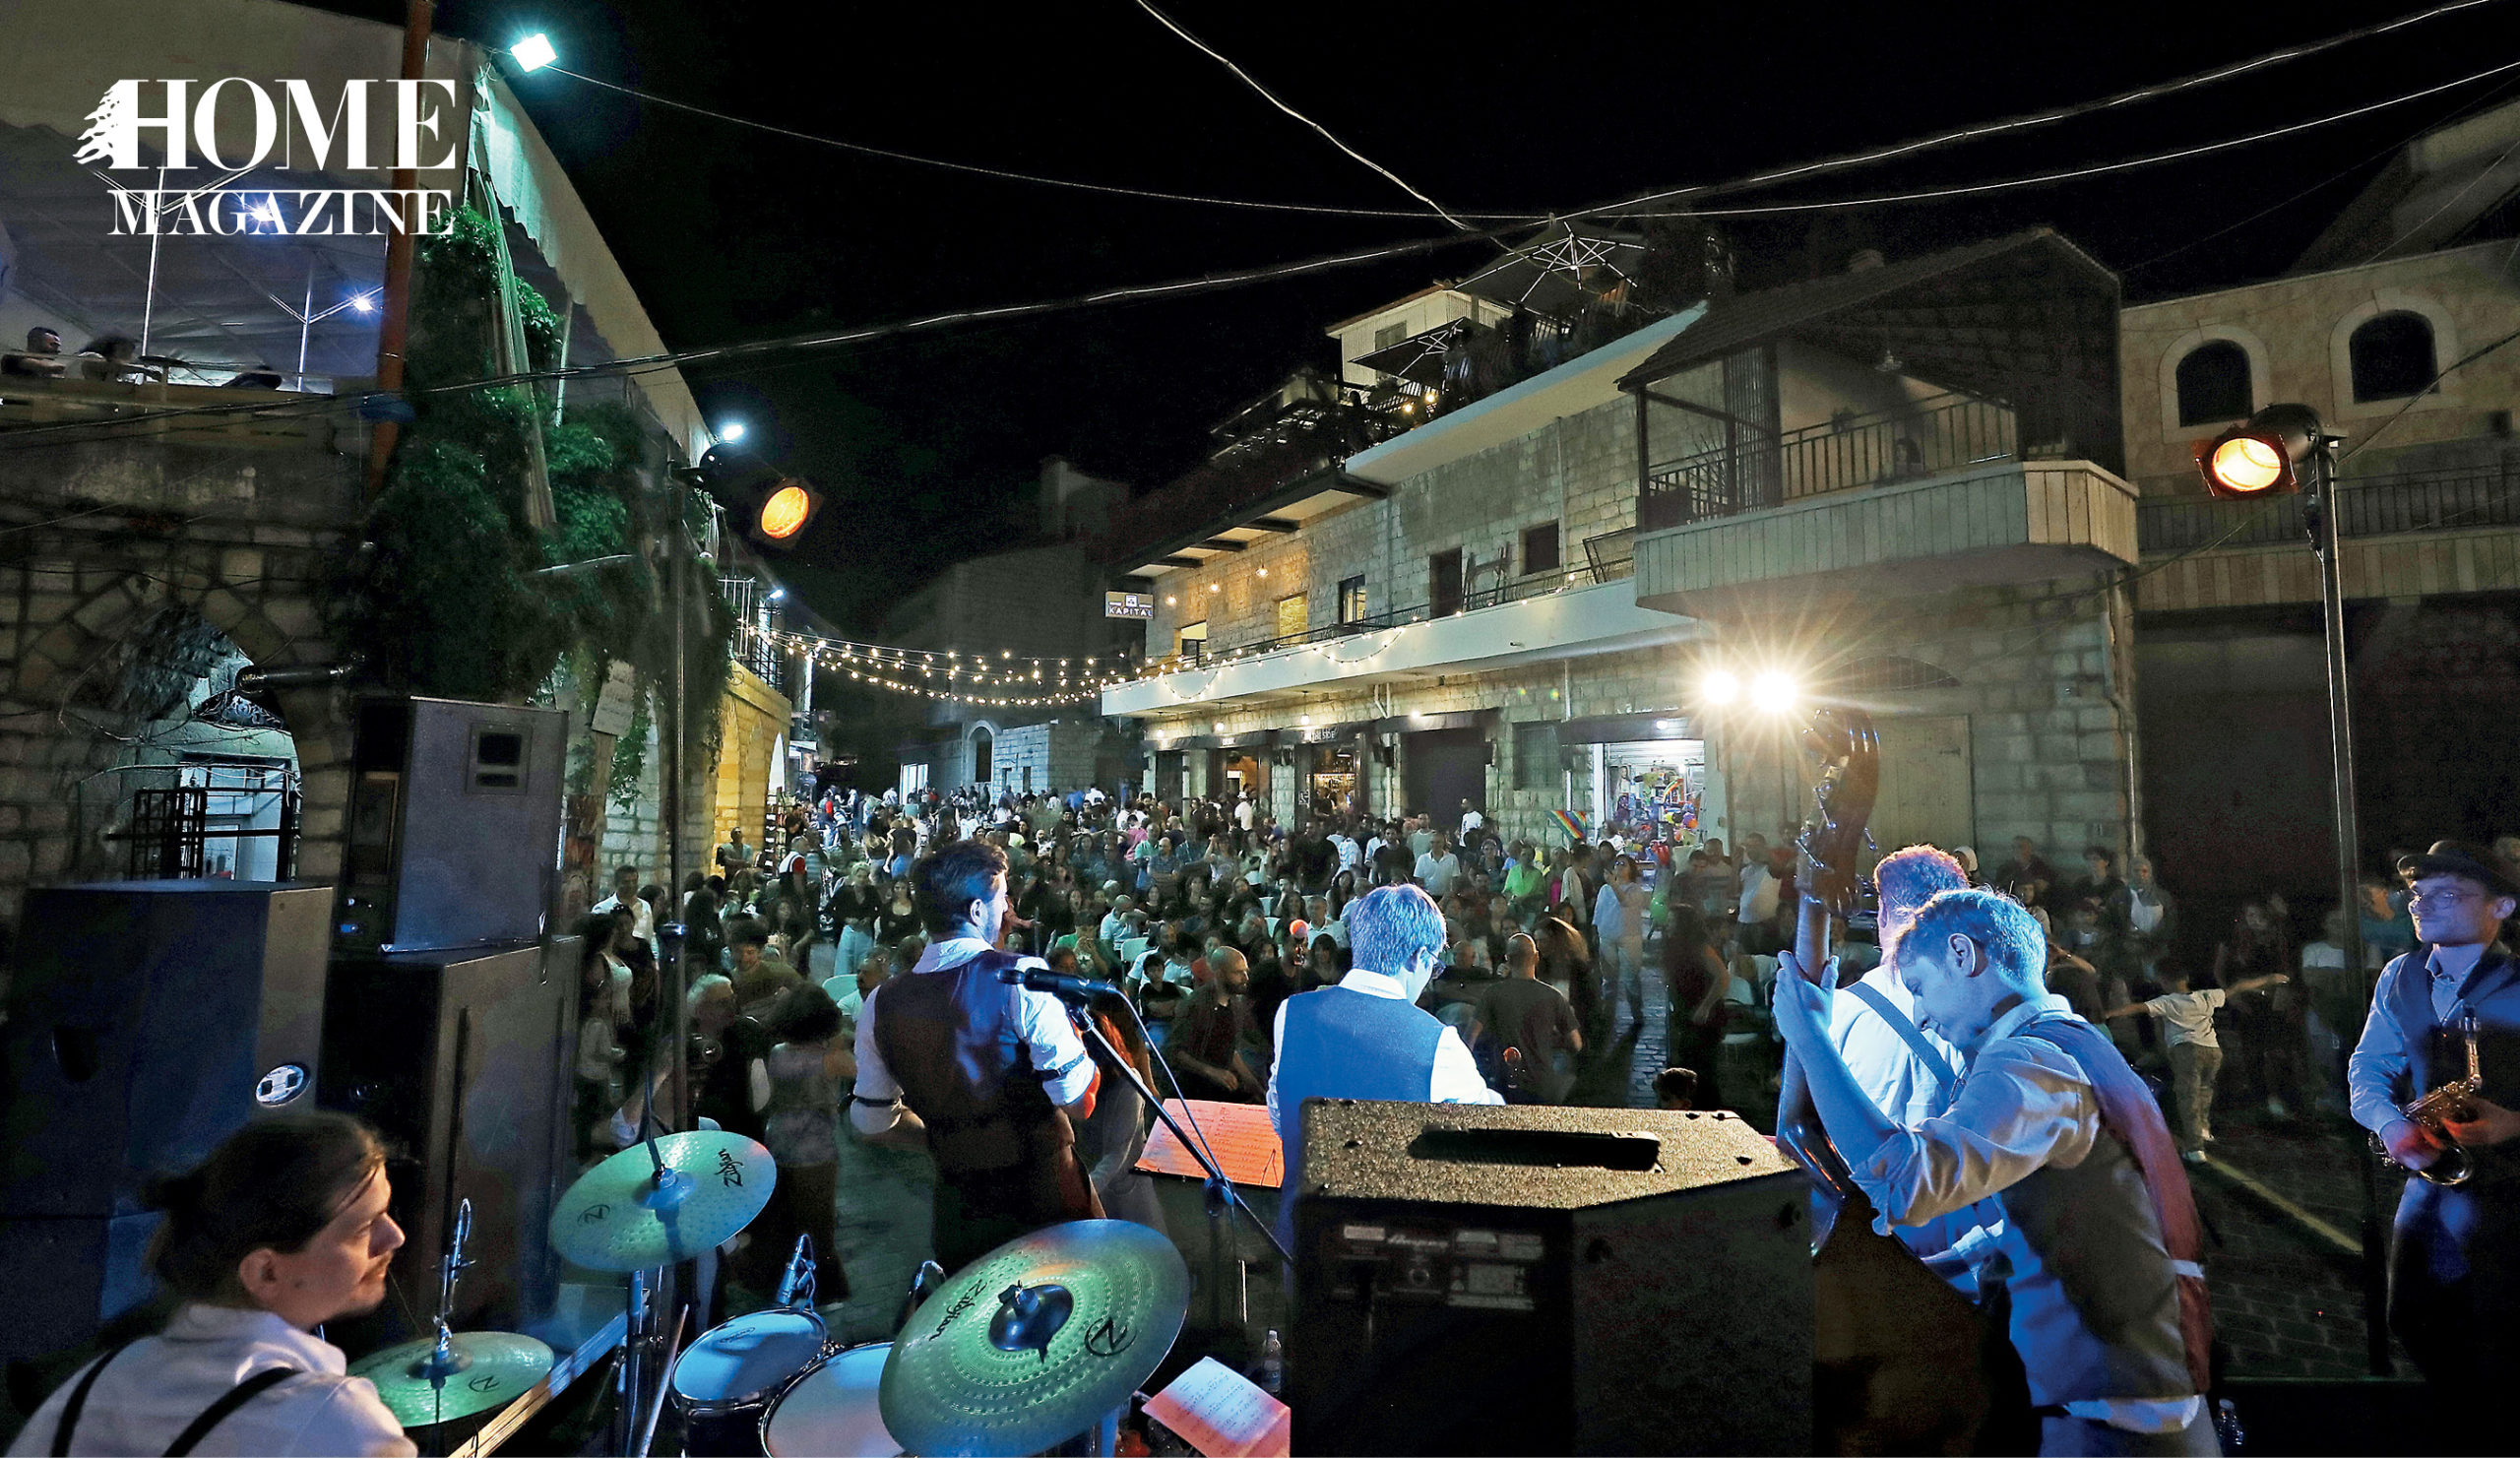 Band performing with crowd amidst buildings and lighting